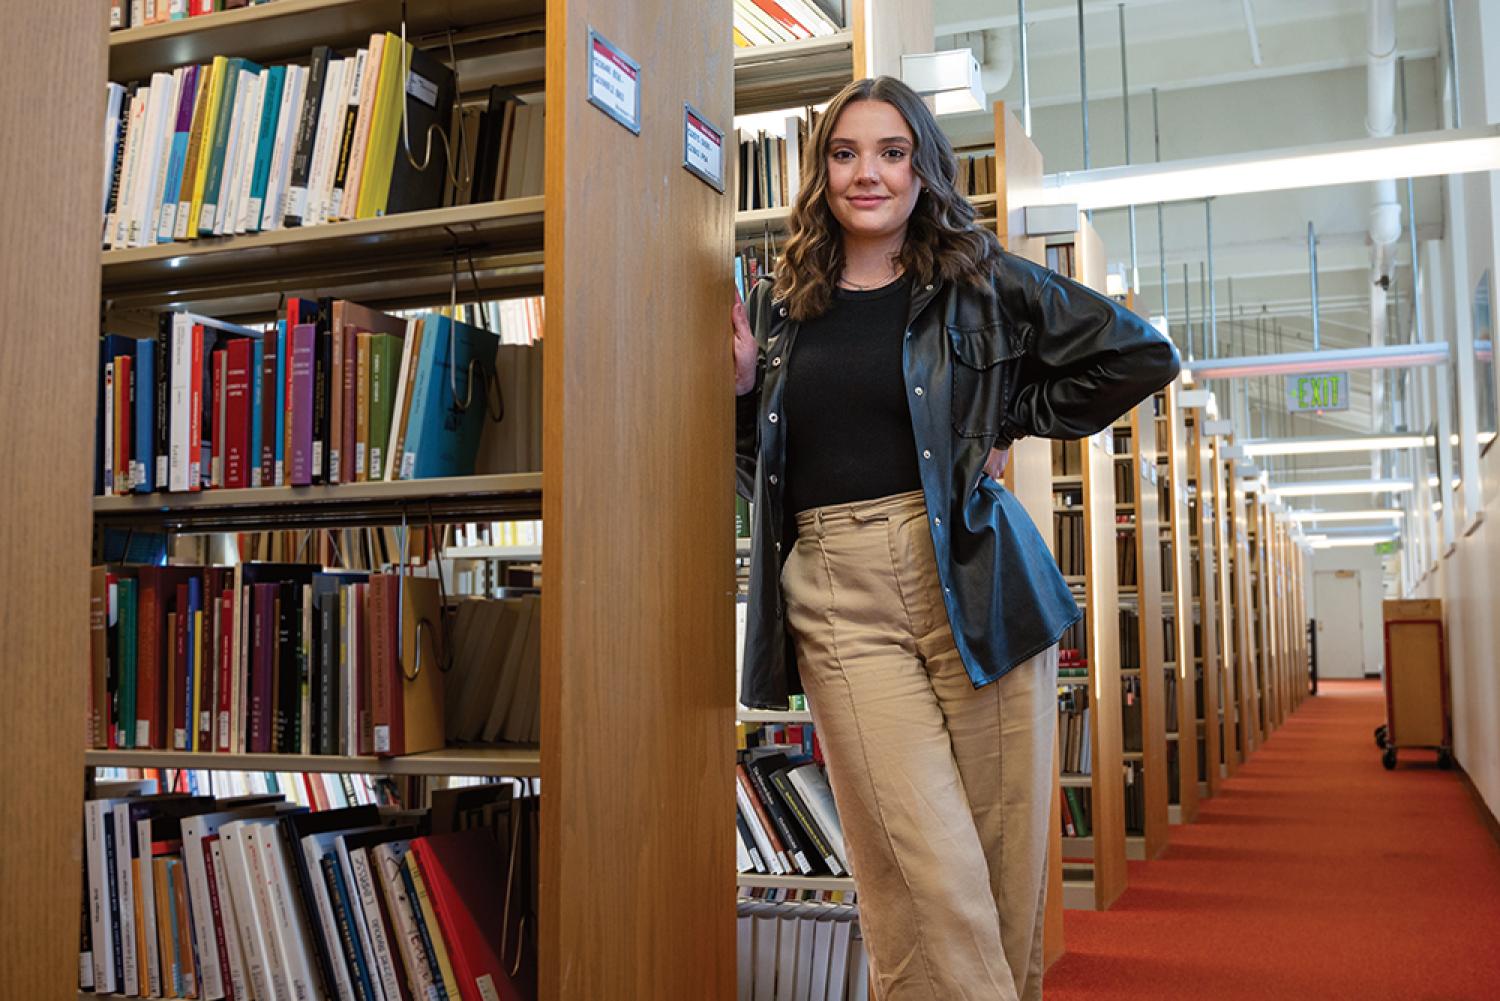 Chloe Theil stands in a library